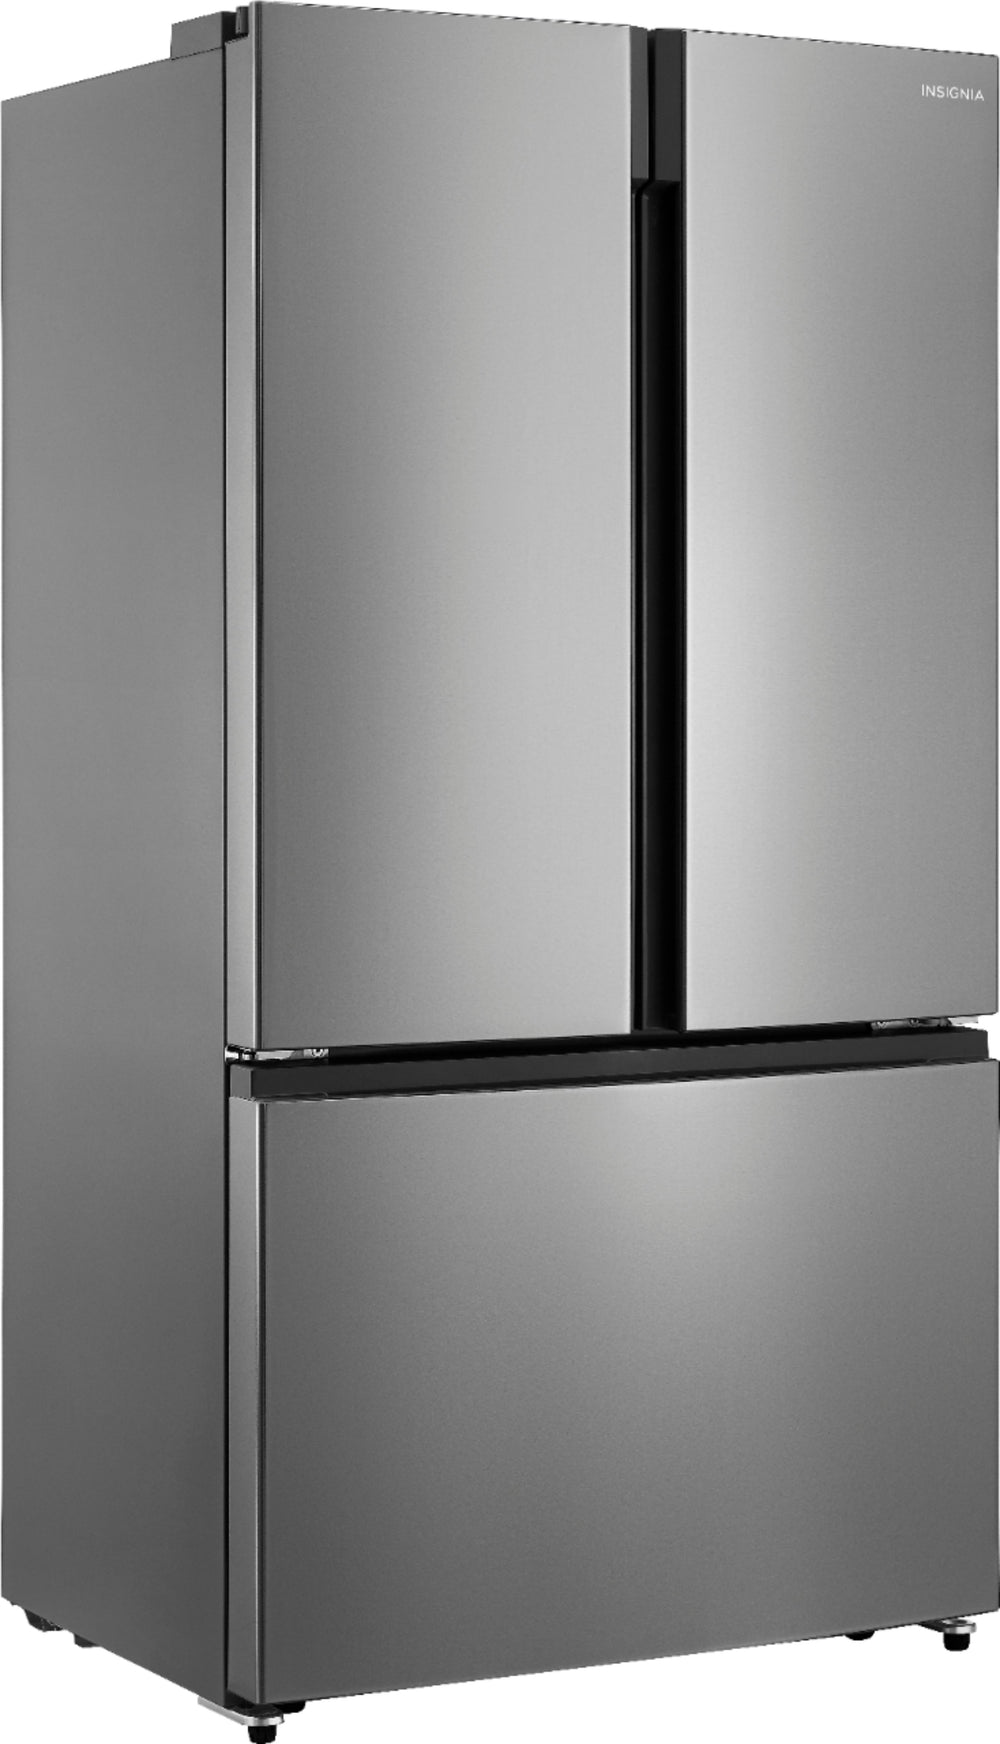 Insignia™ - 20.9 Cu. Ft. French Door Counter-Depth Refrigerator - Stainless steel_1